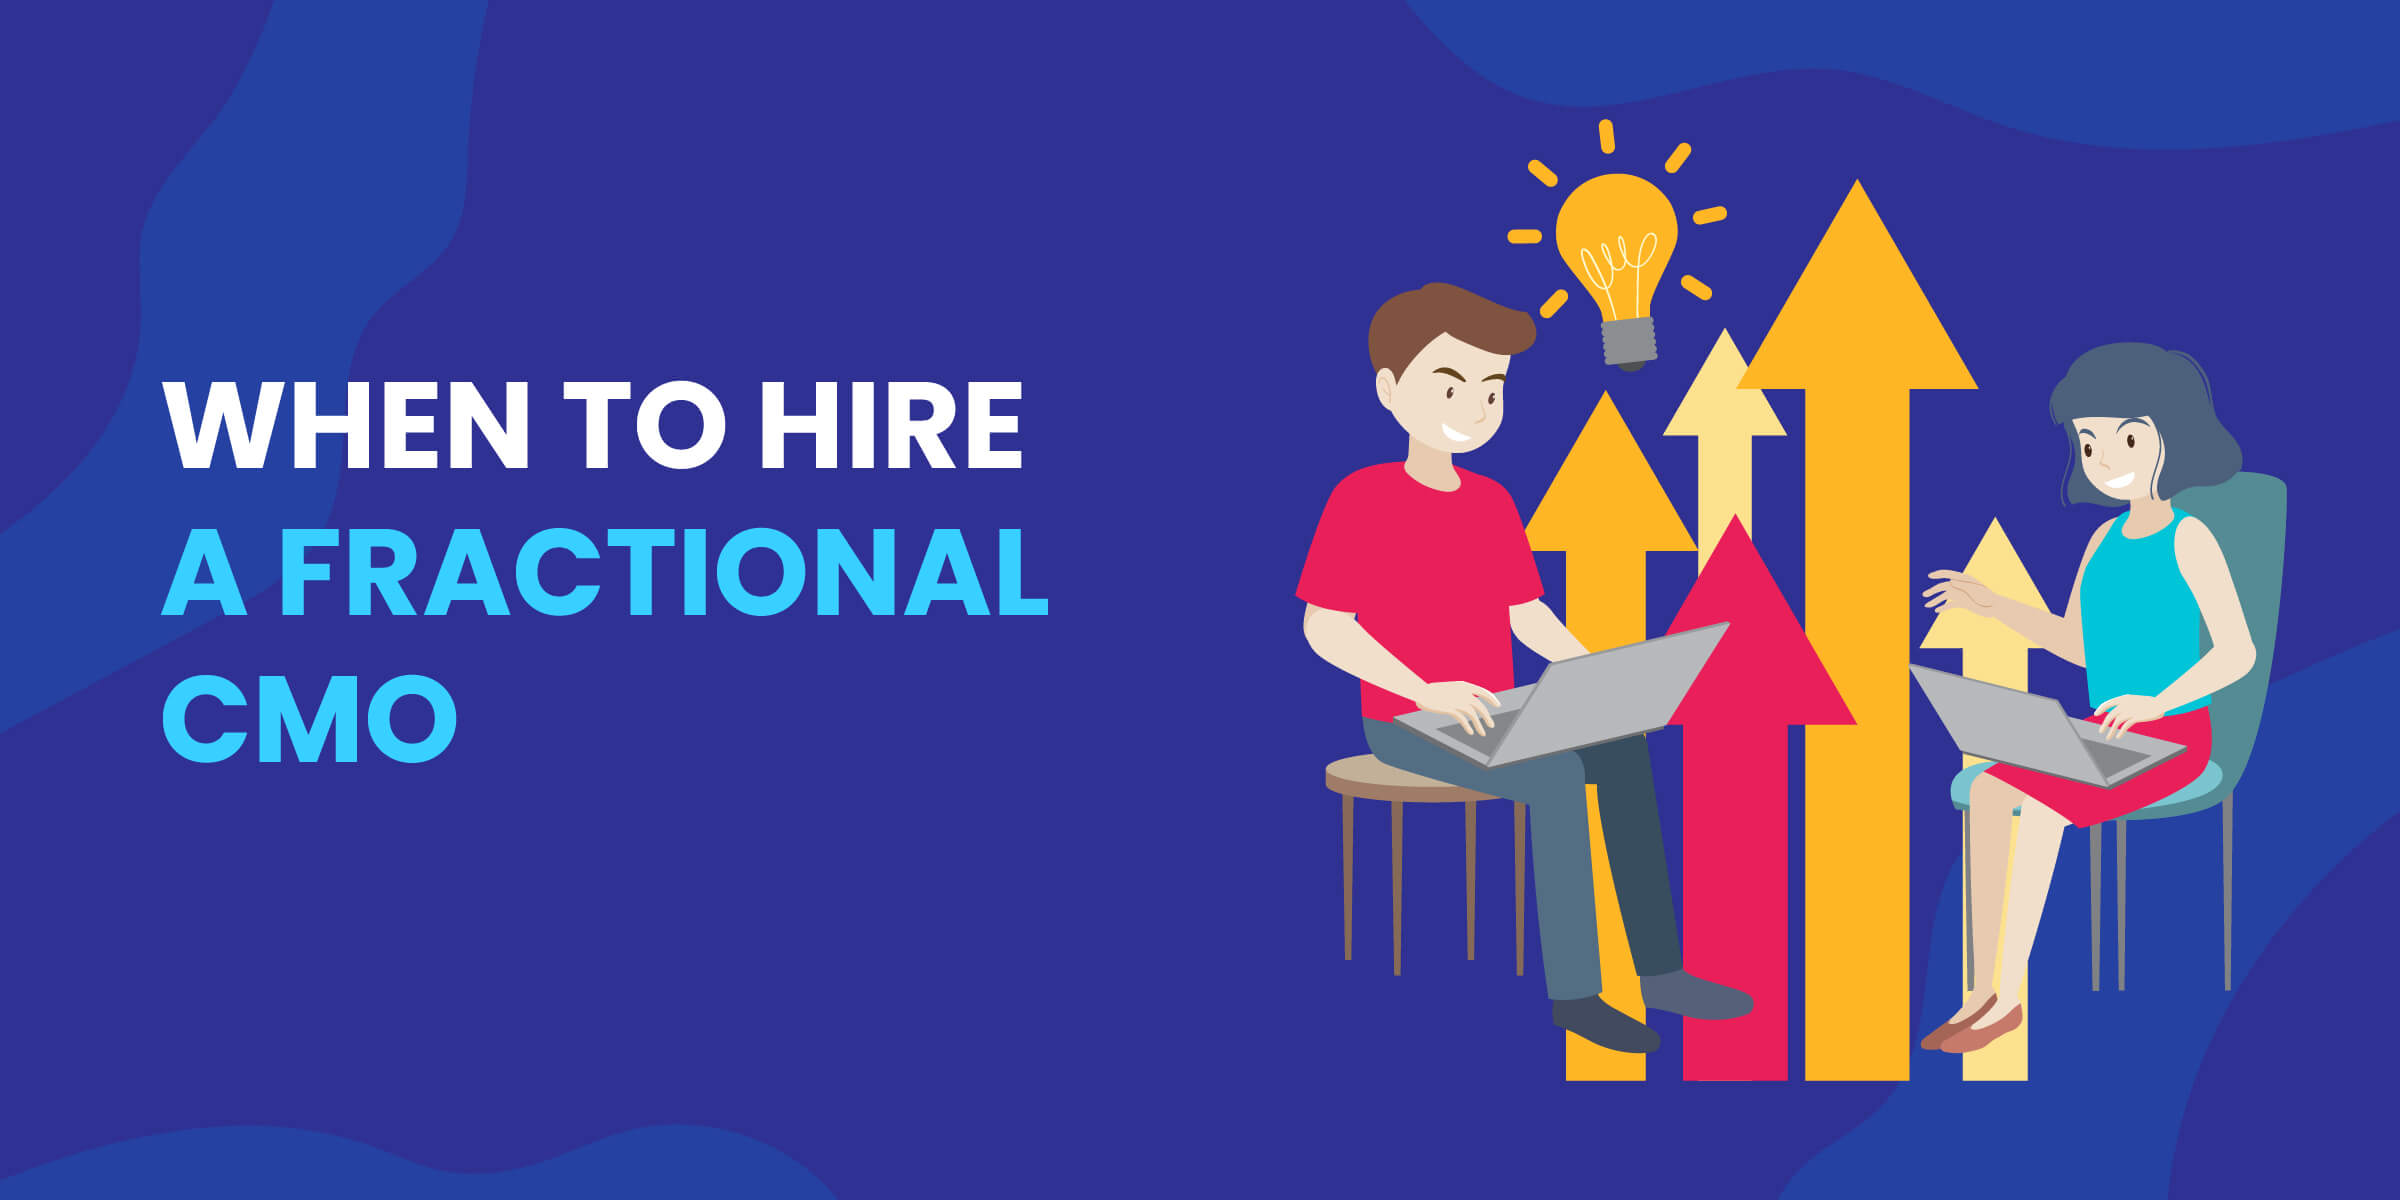 When to Hire Fractional CMO